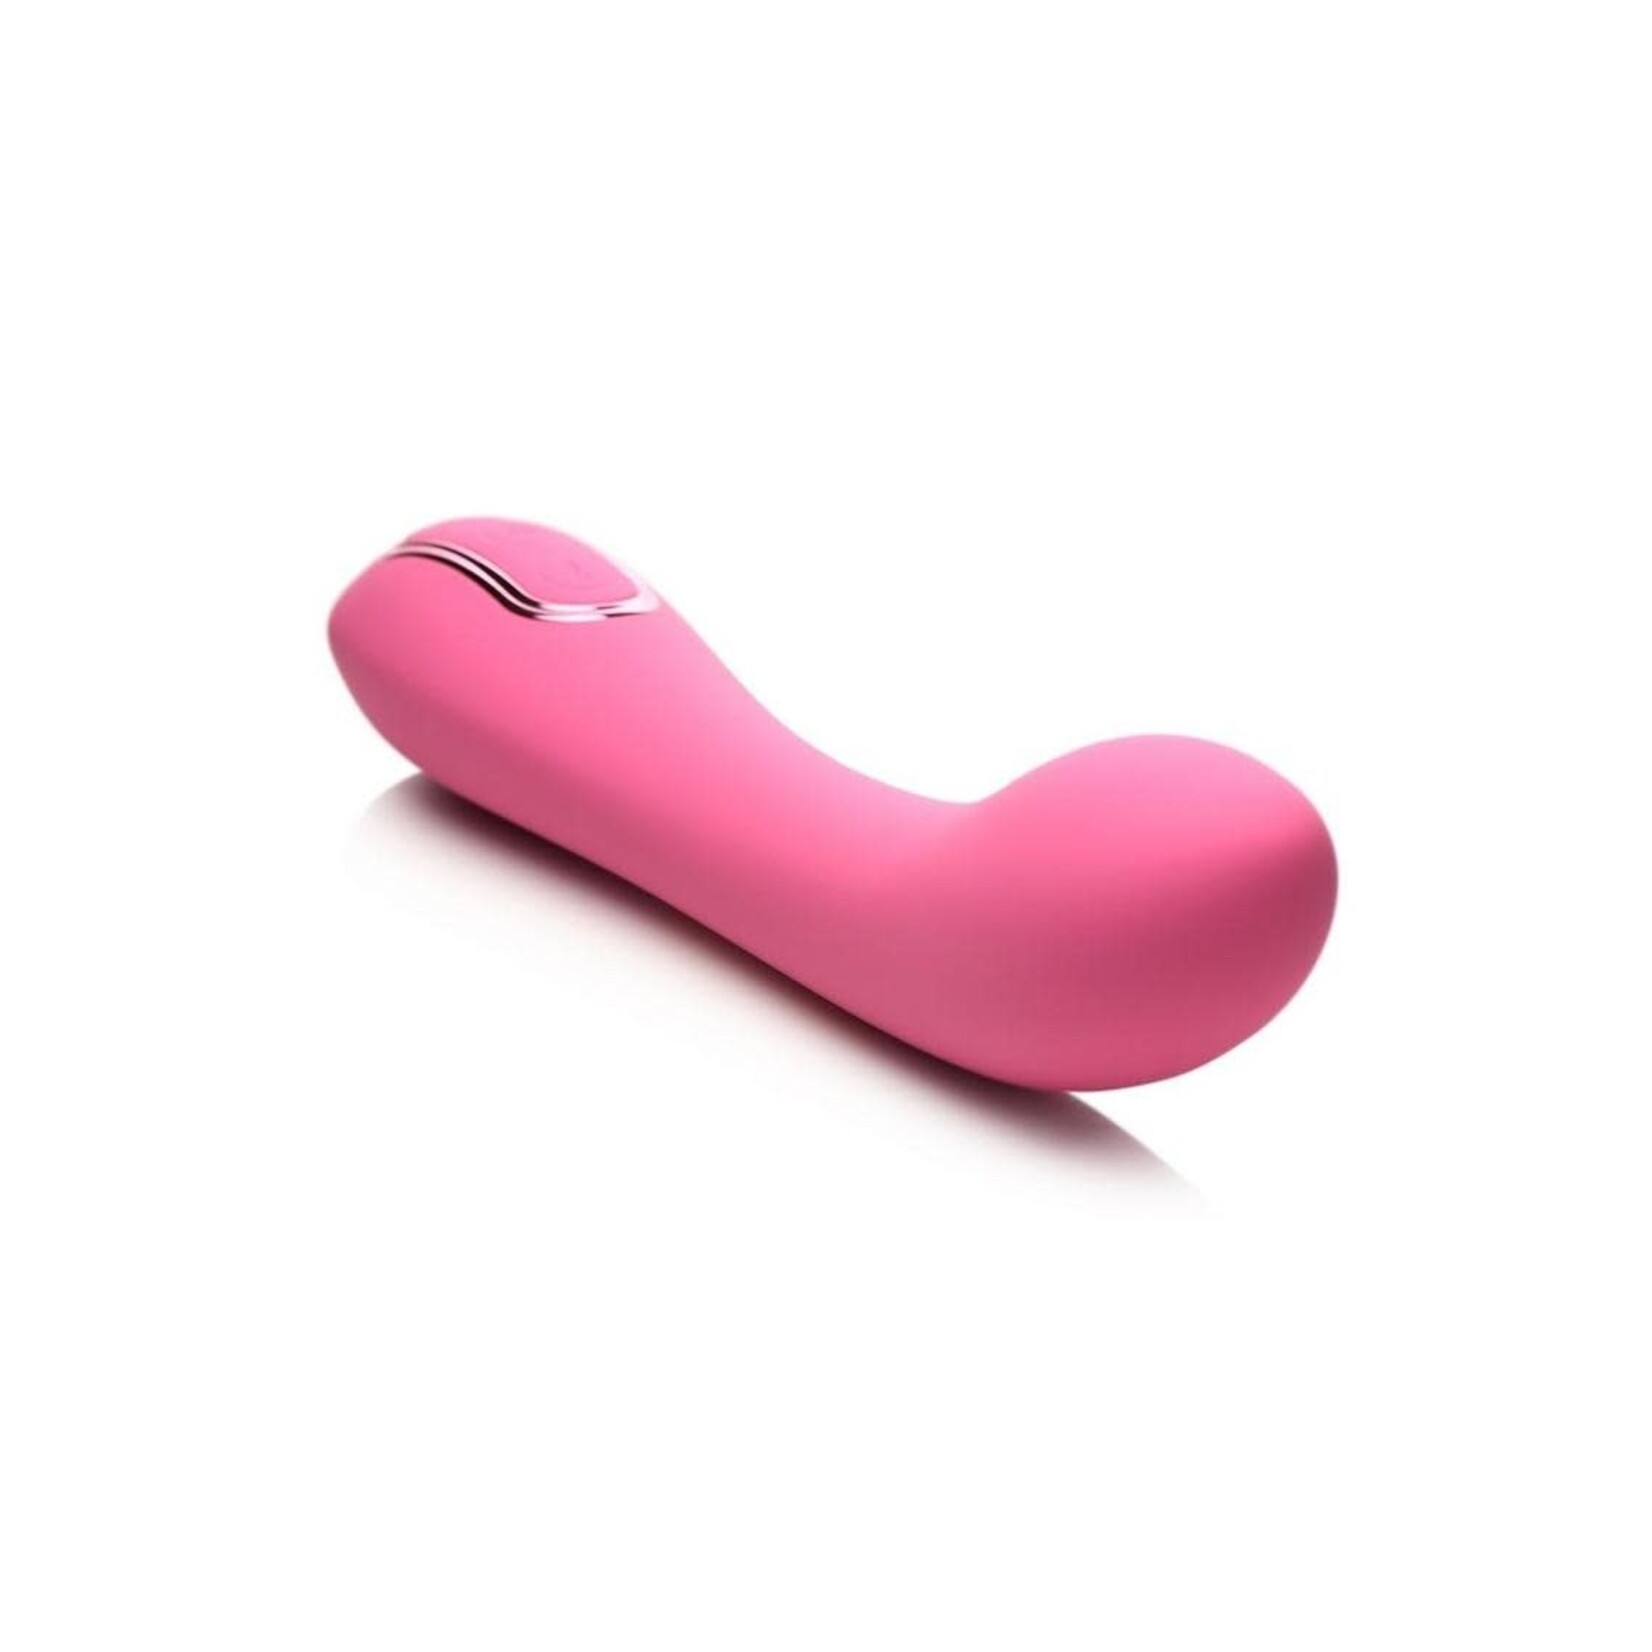 Inmi Extreme-G Inflating G-Spot Rechargeable Silicone Vibrator - Pink